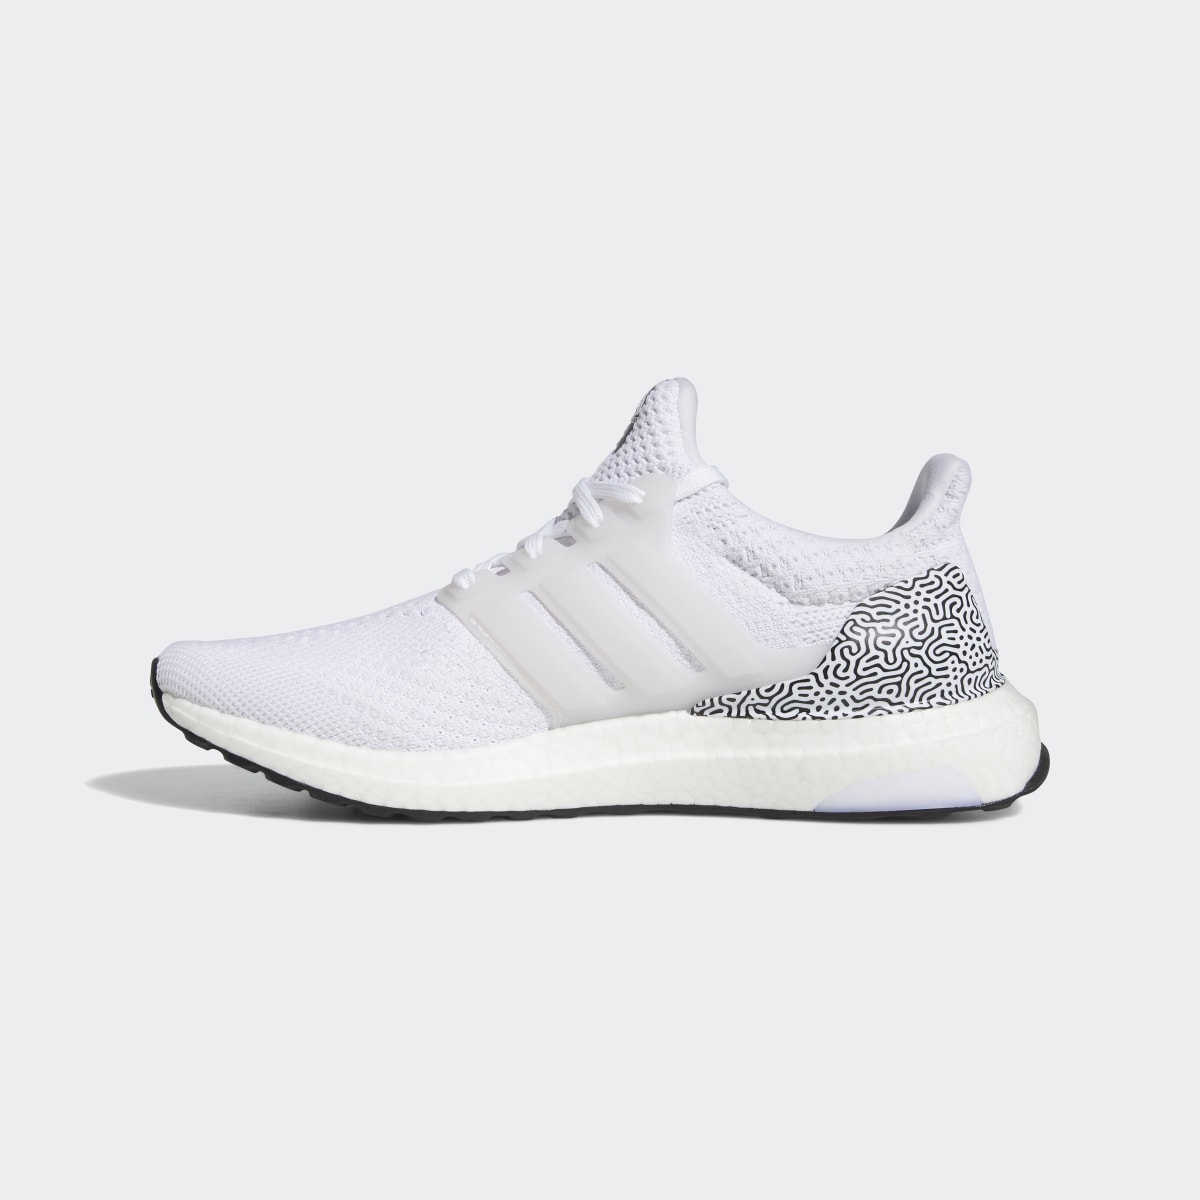 Adidas ULTRABOOST DNA SHOES. 10